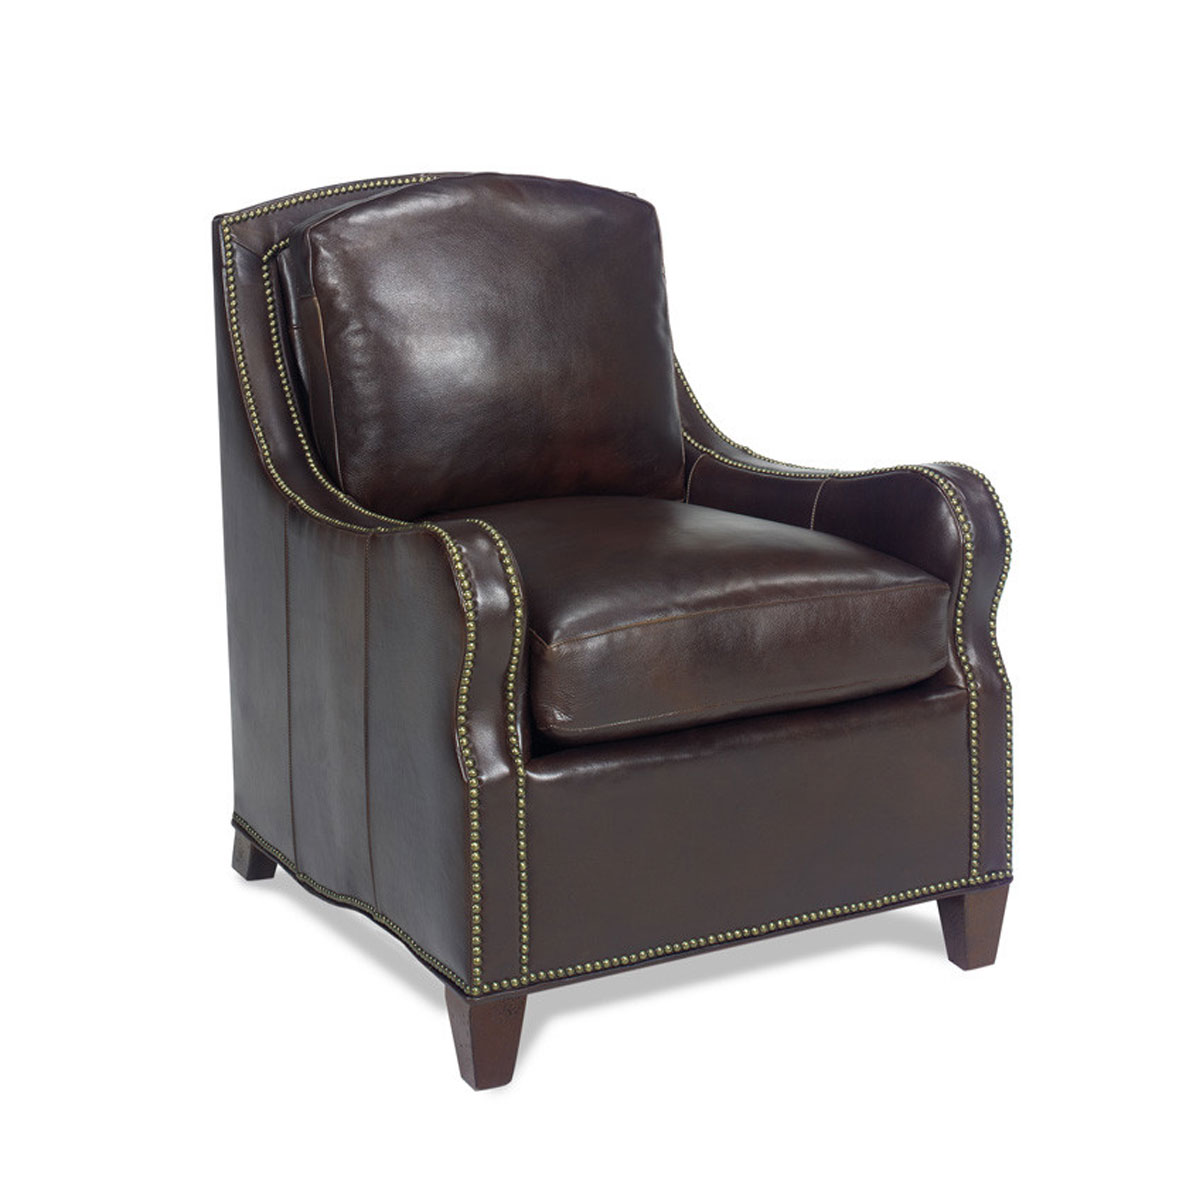 Arundel 214 Chair by McKinley Leather